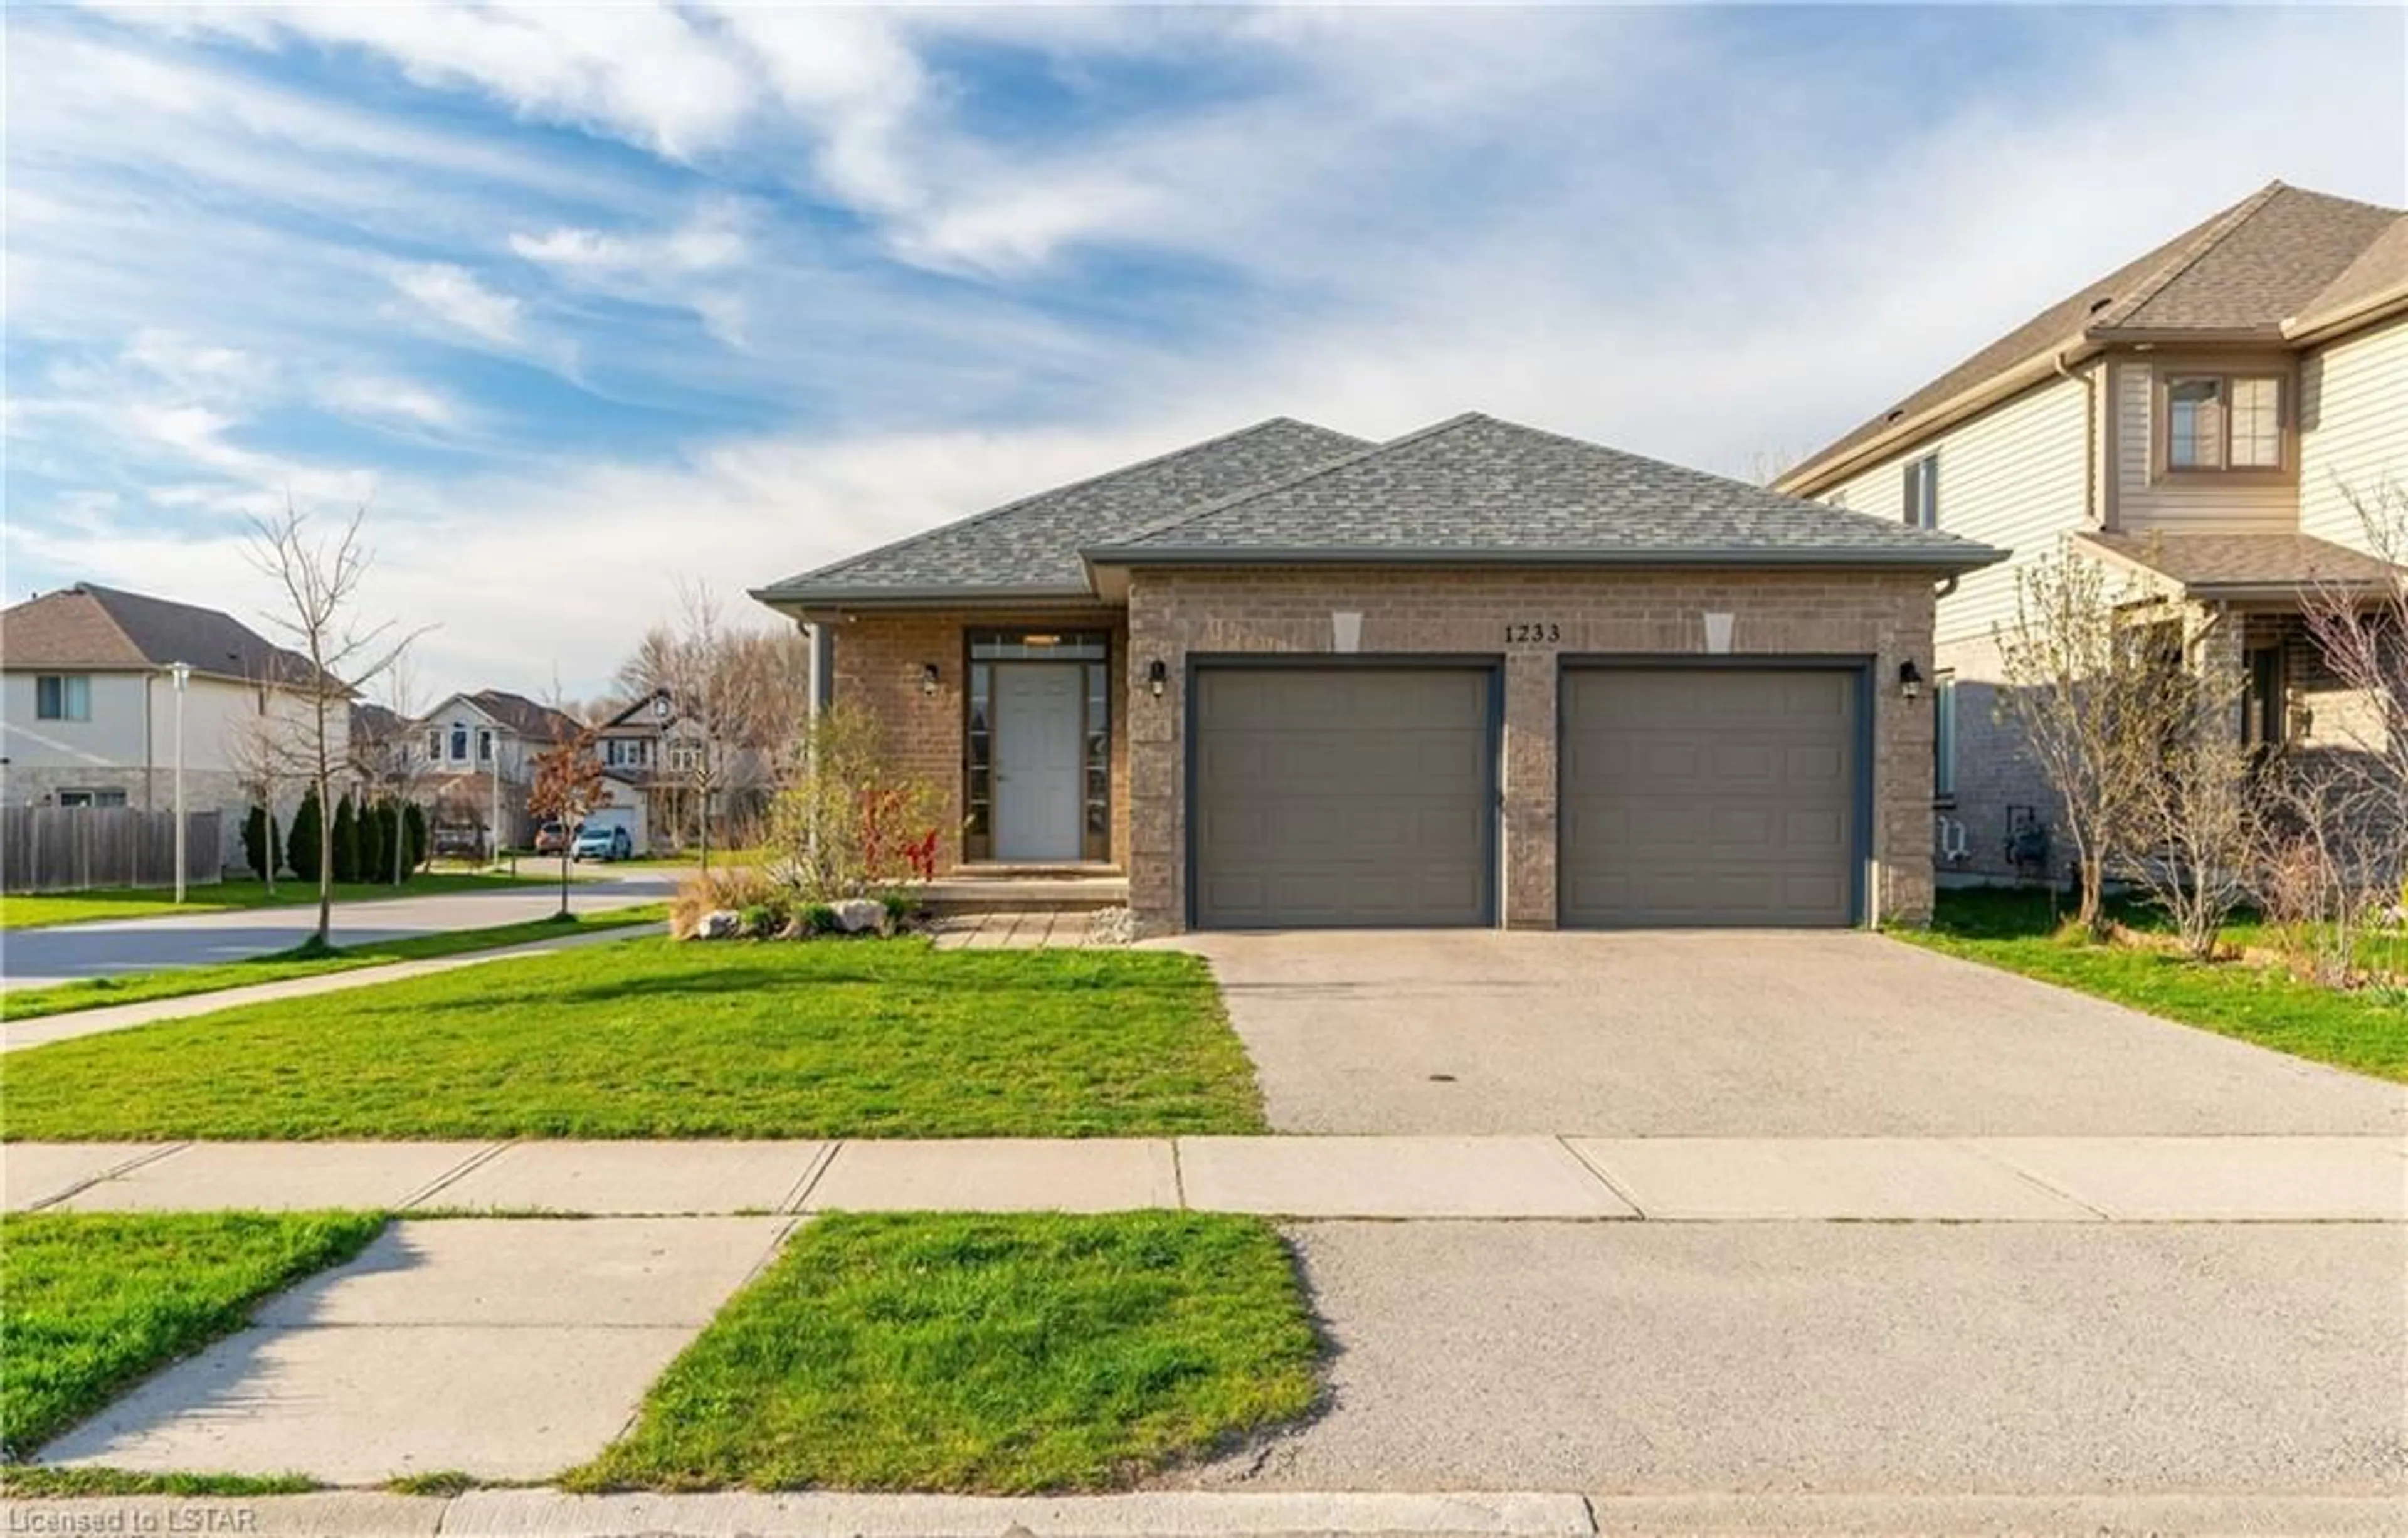 Frontside or backside of a home for 1233 Lawson Rd, London Ontario N6G 5K9